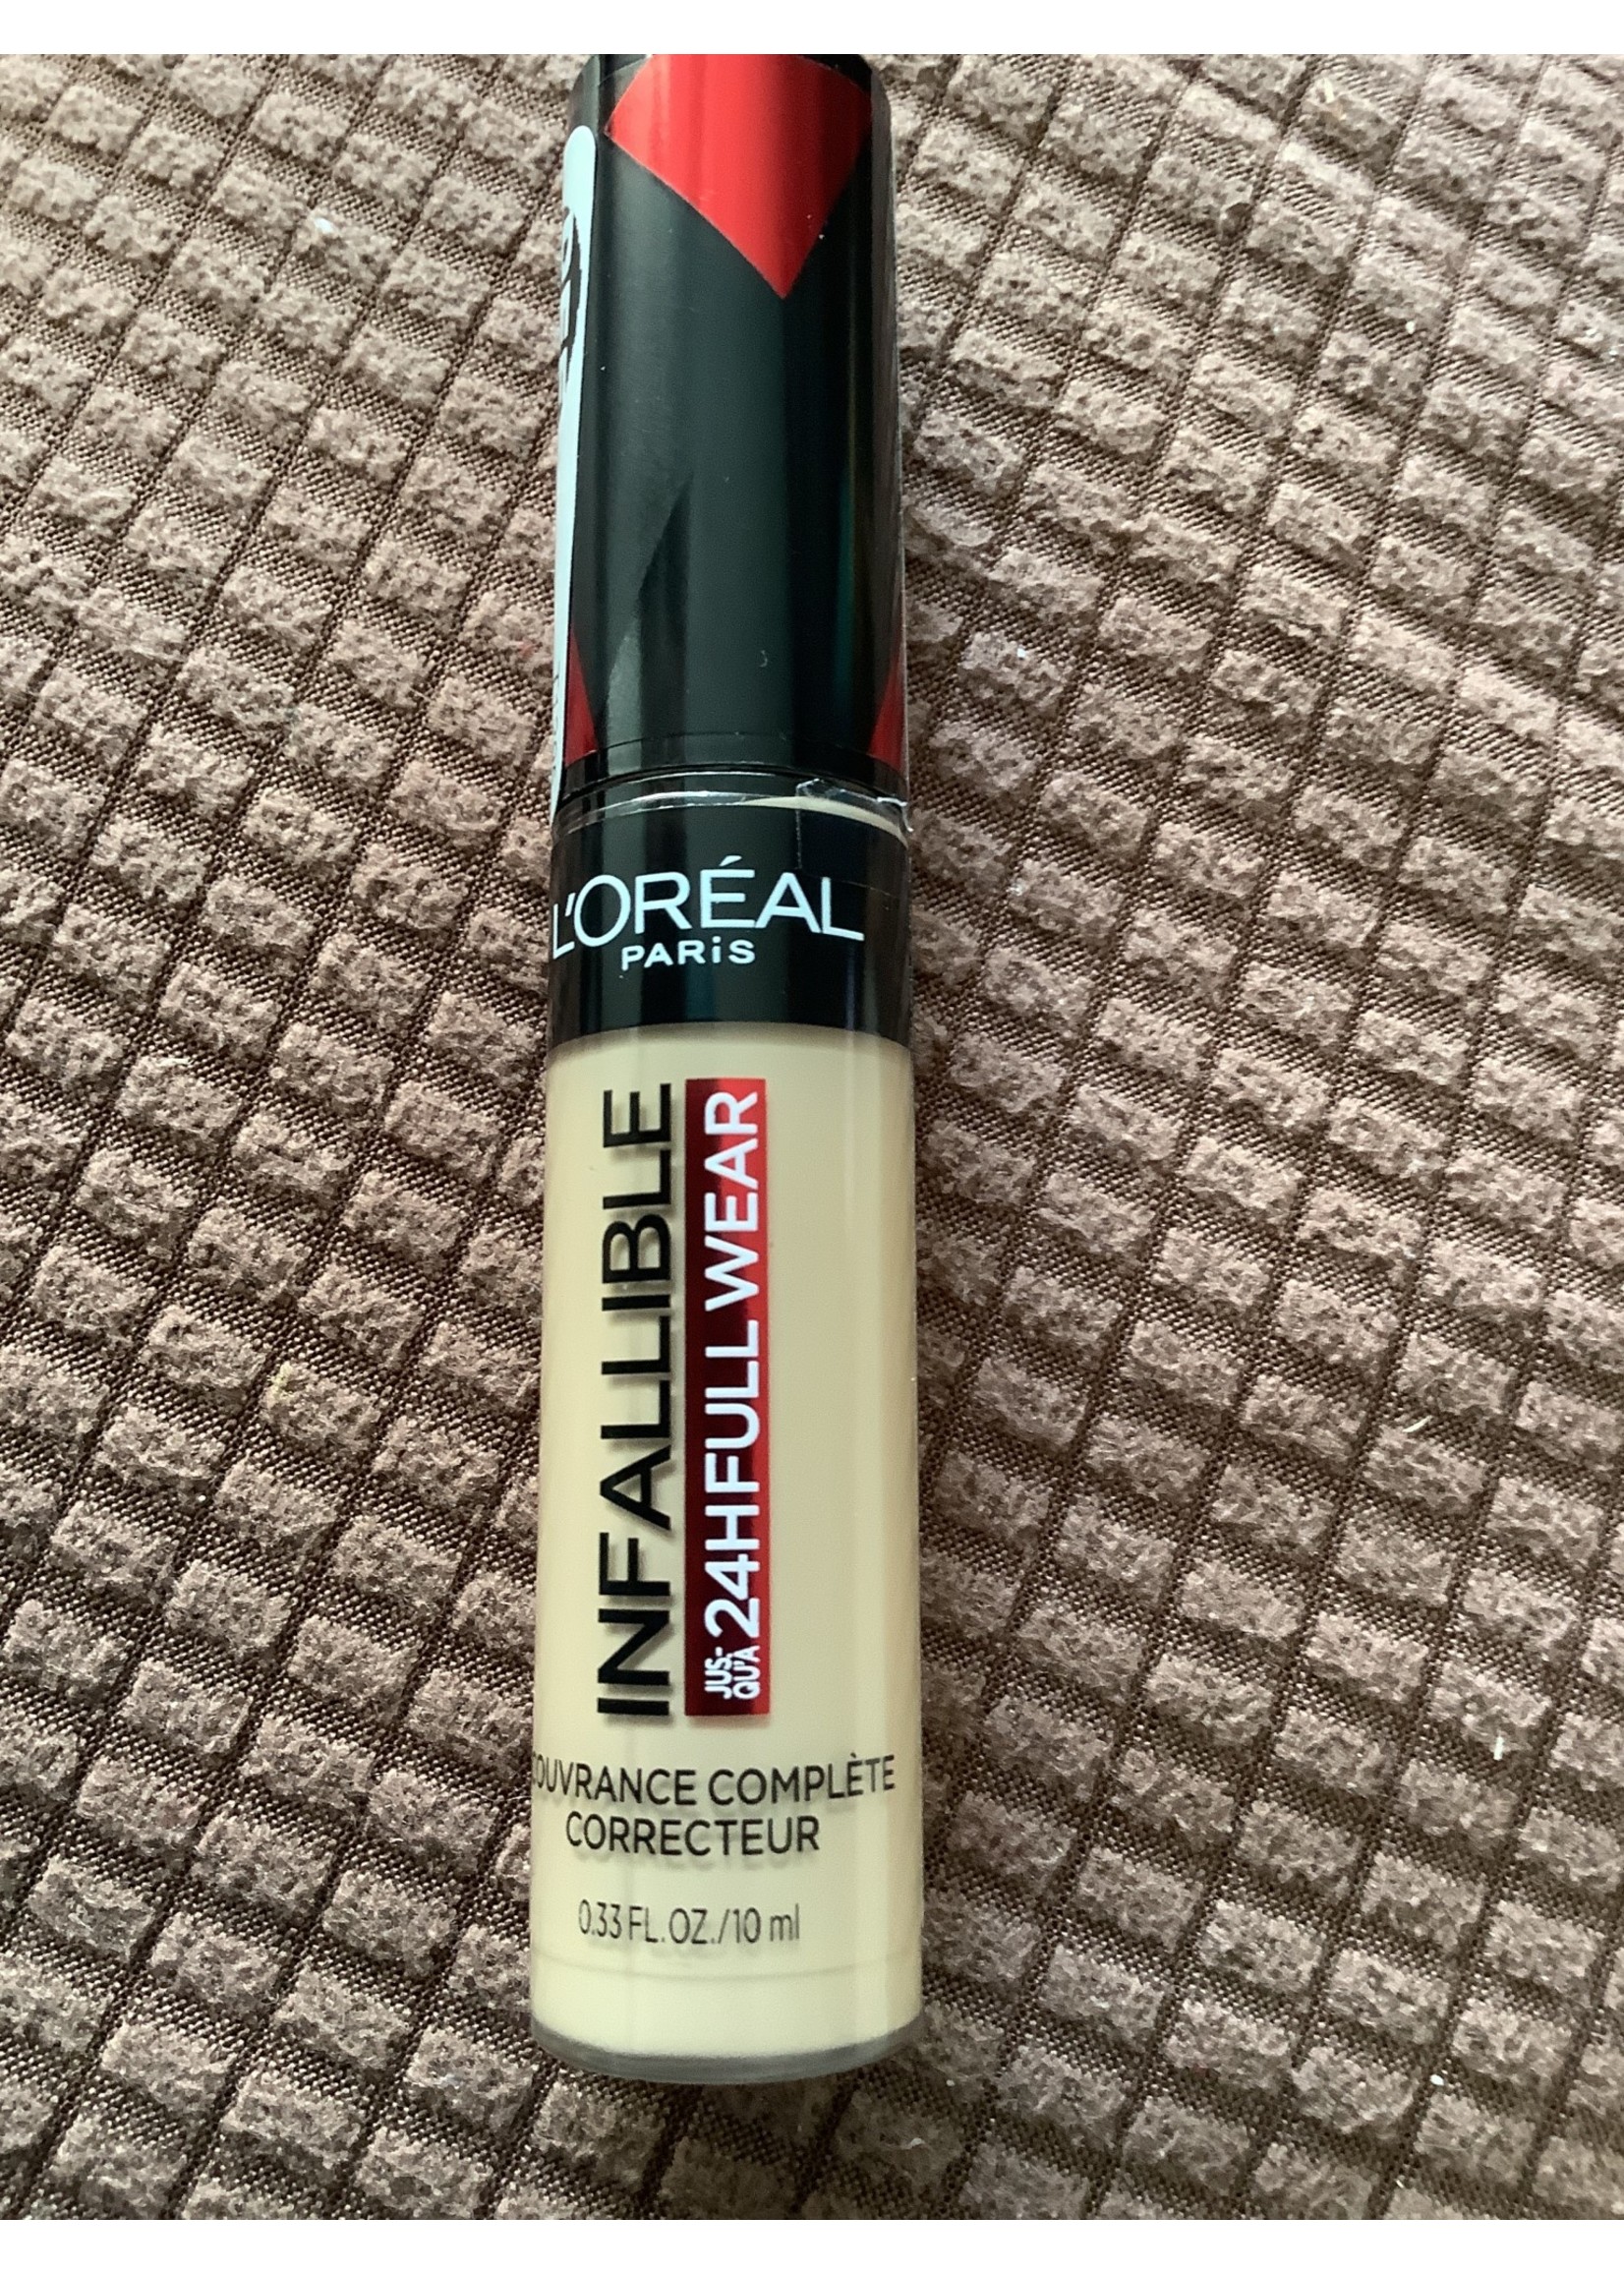 Open- L’Oreal Infallible Full Coverage Concealer .33oz